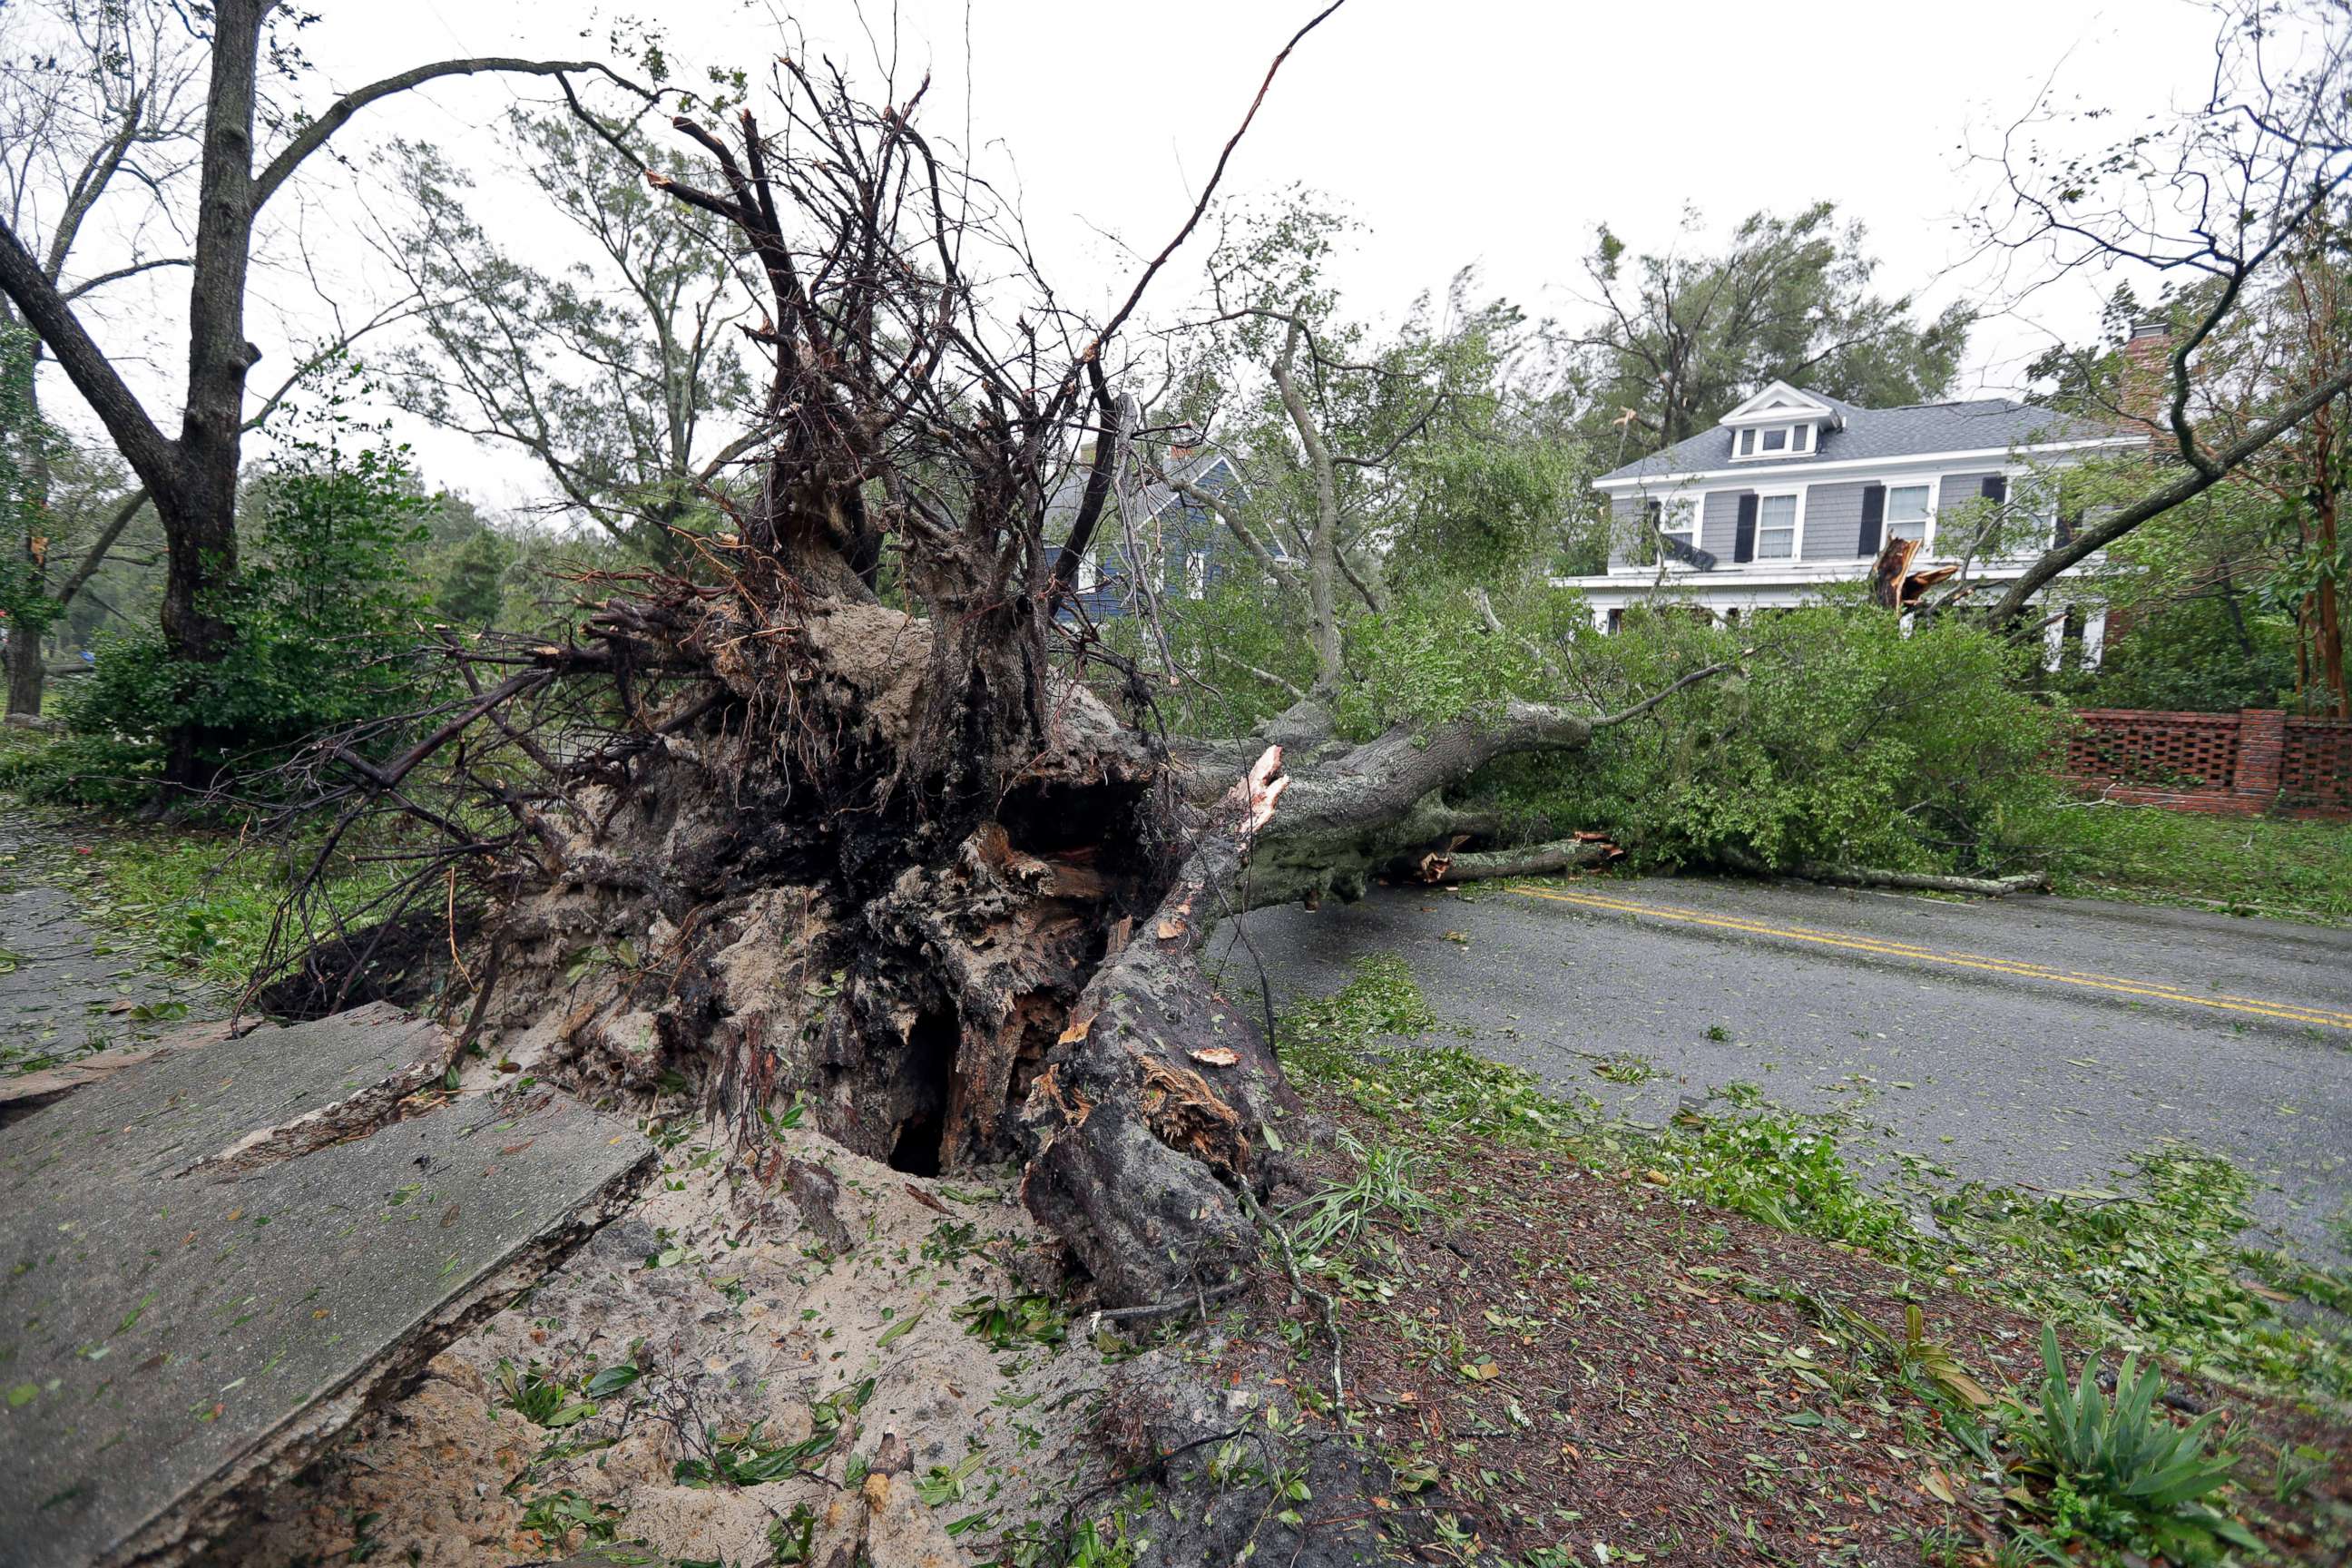 PHOTO: A tree uprooted by strong winds lies across a street in Wilmington, N.C., after Hurricane Florence made landfall, Sept. 14, 2018.